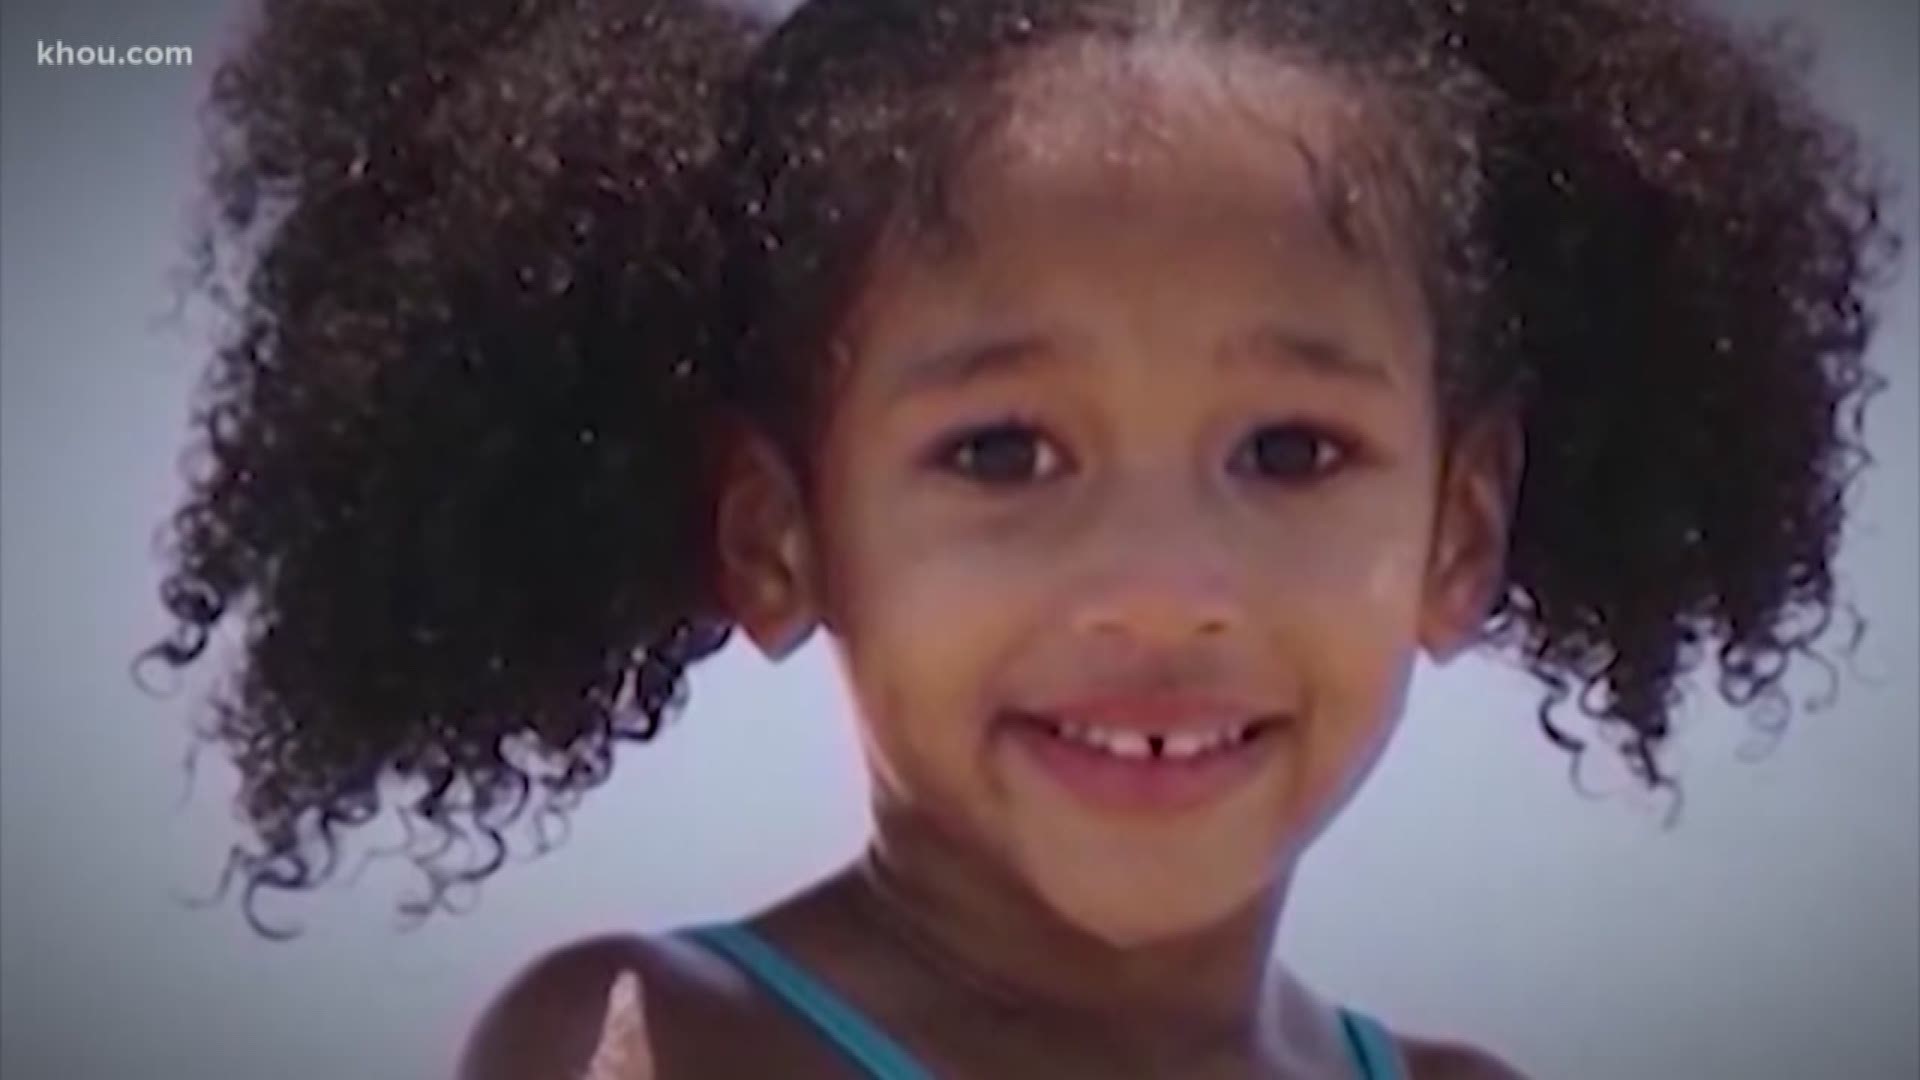 On Saturday morning, hundreds of people said goodbye to 4-year-old Maleah Davis at her funeral in south Houston. Maleah’s death has been felt across Houston and the nation.